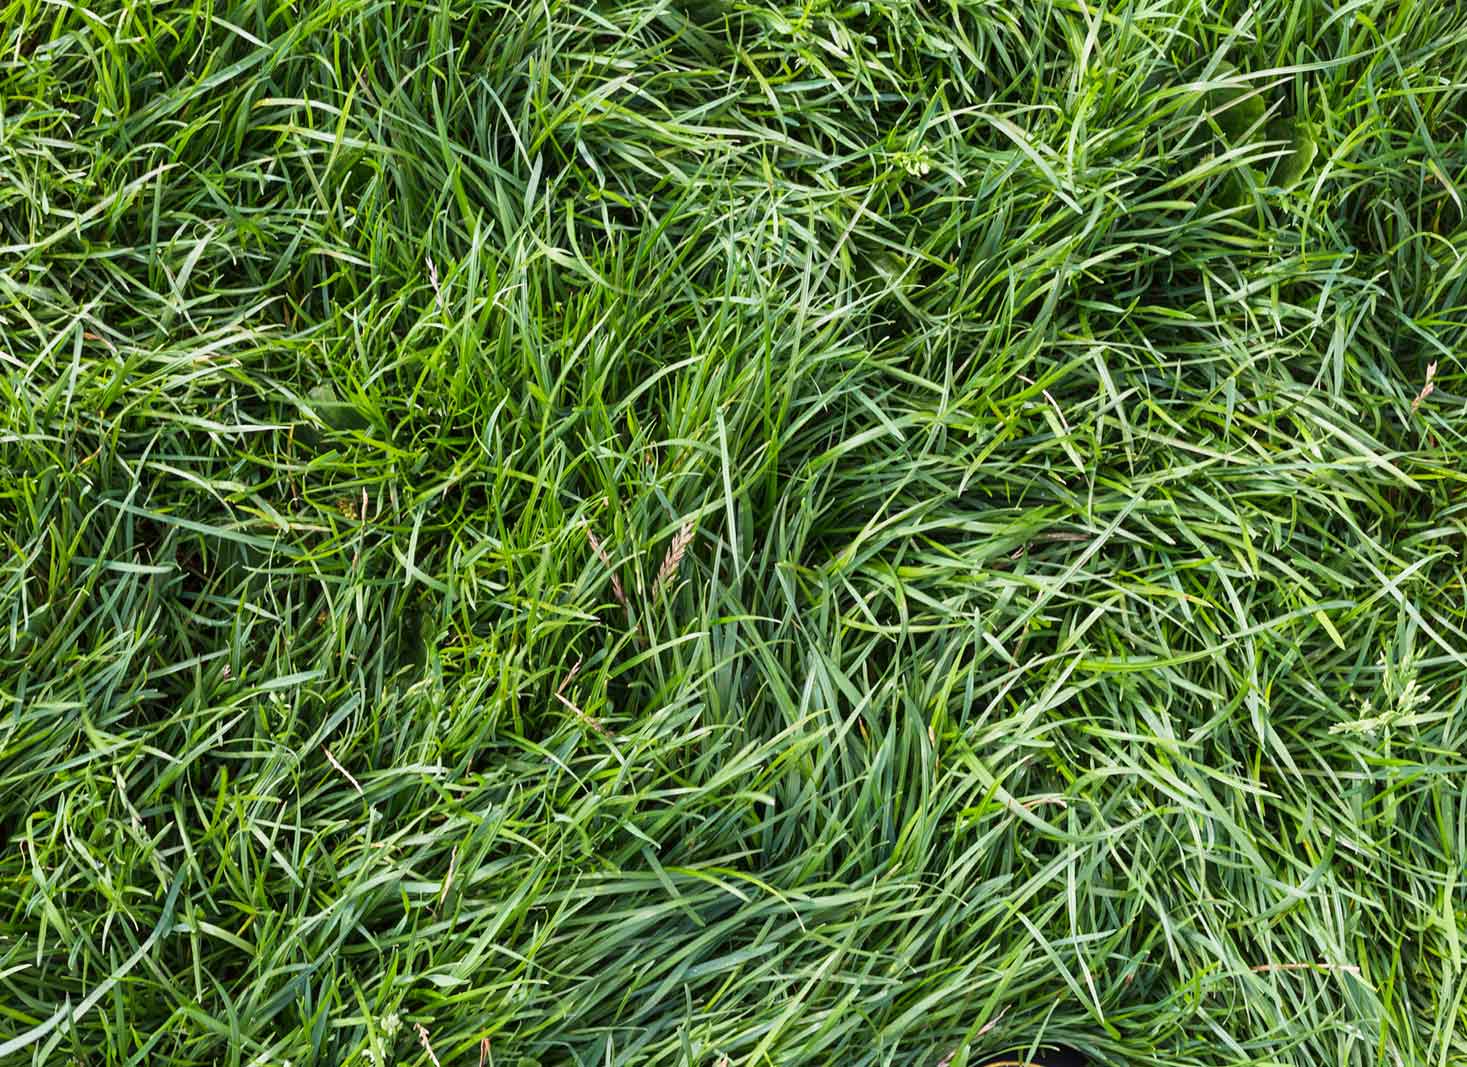 Identifying the Right Time to Aerate Your Lawn